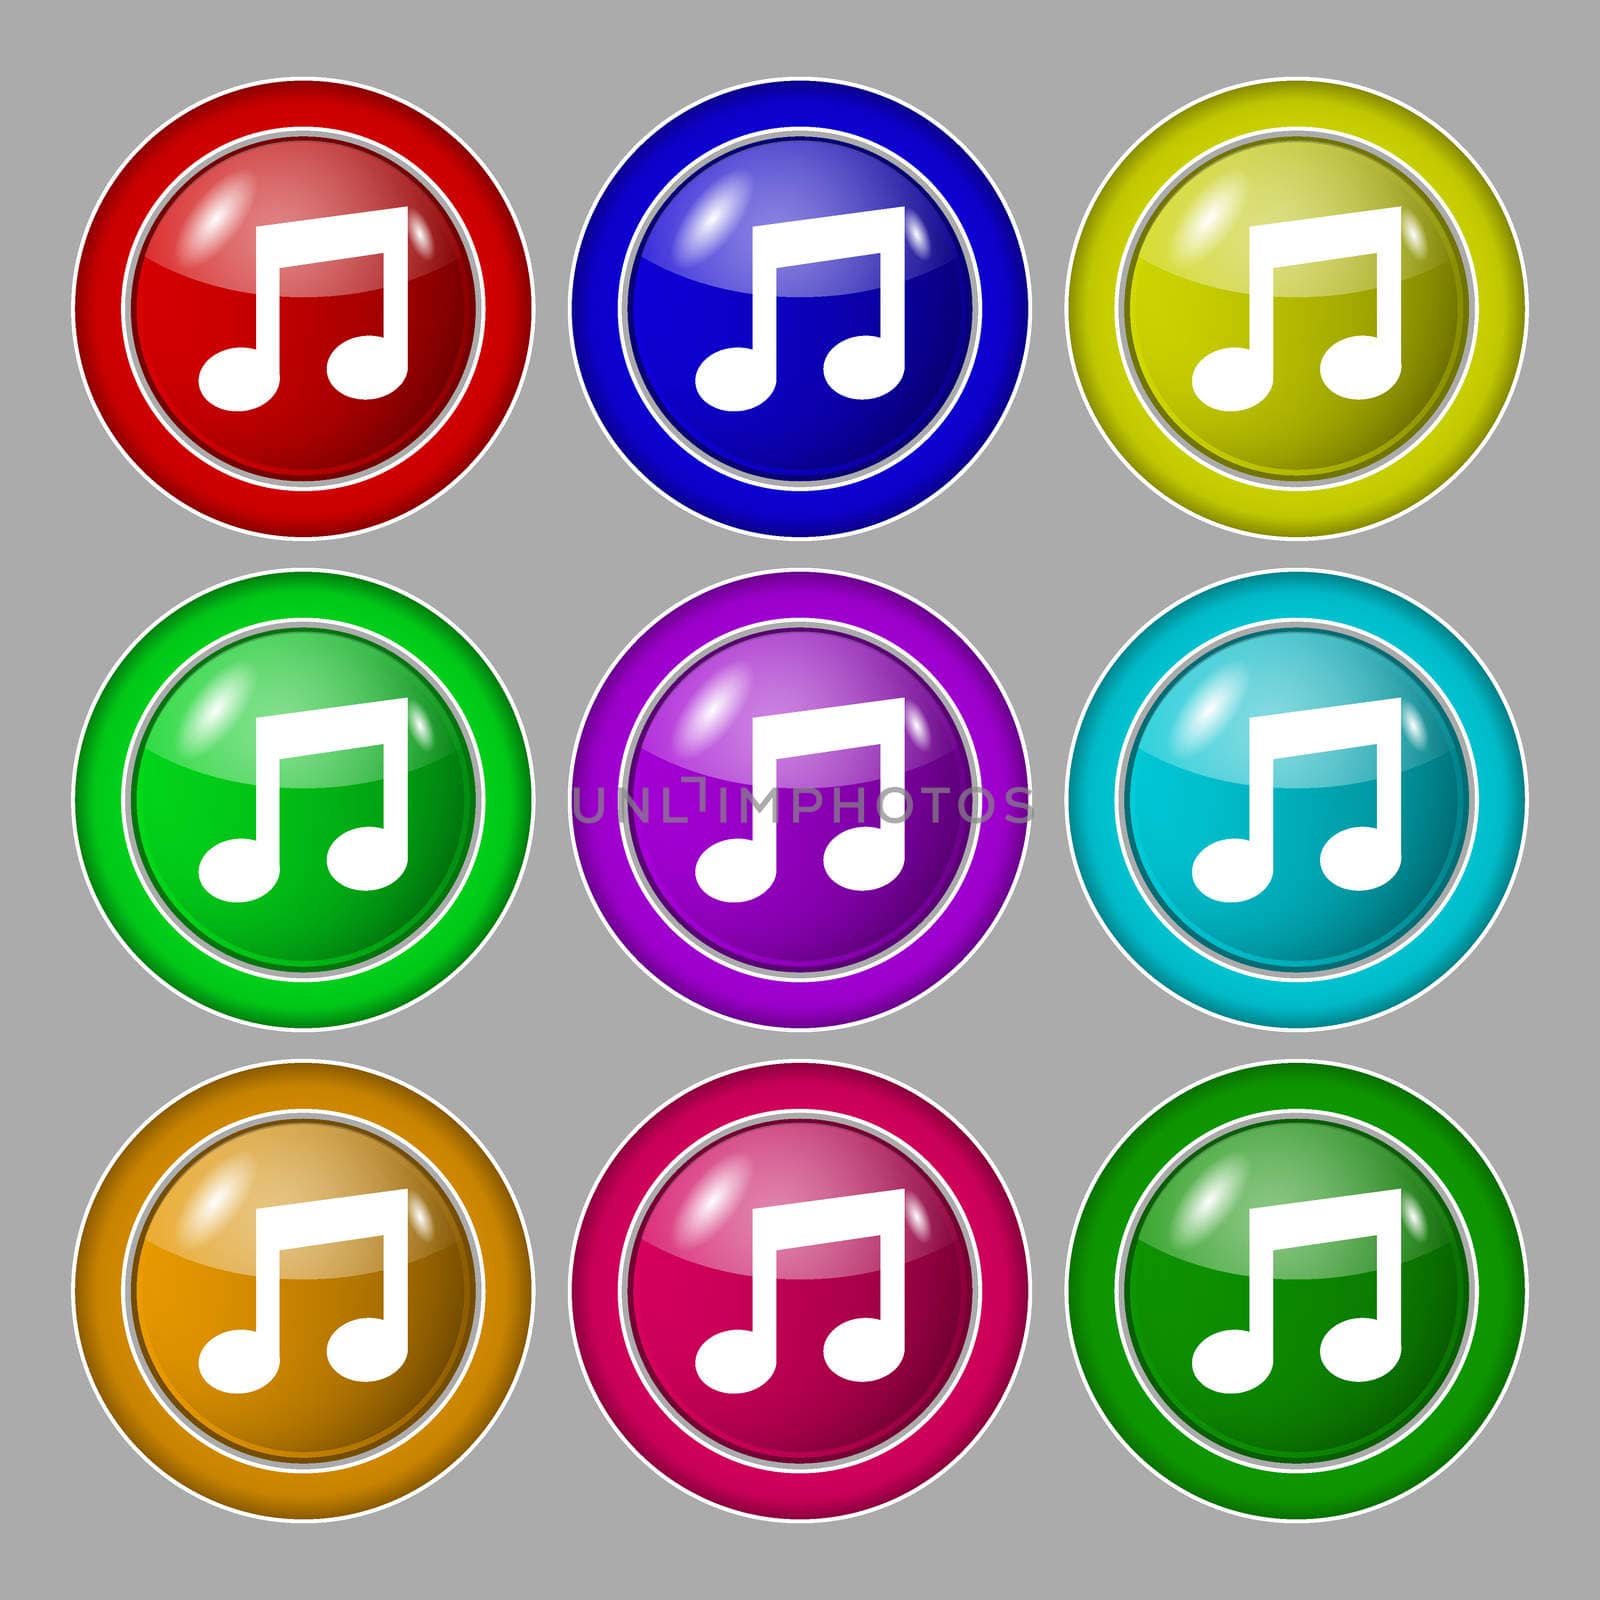 Music note sign icon. Musical symbol. Symbol on nine round colourful buttons. illustration